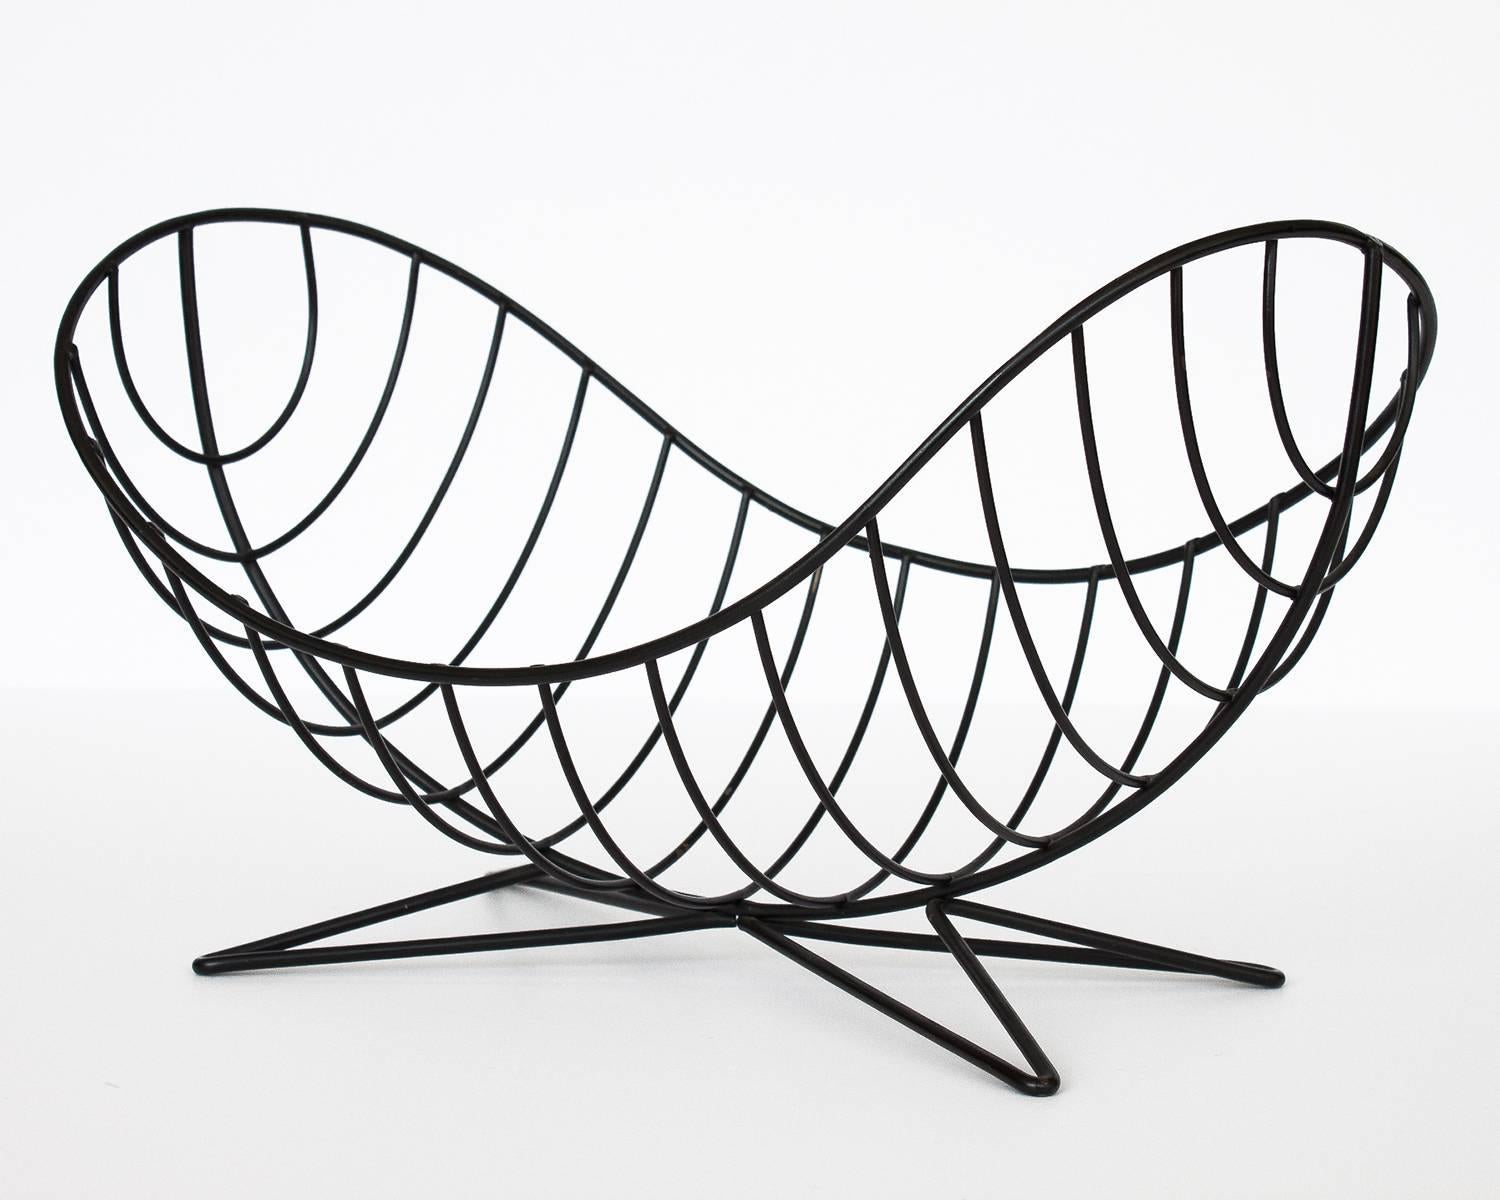 Andree Ferris and Reta Shacknove B-3 Twin Scoop wire fruit bowl. Part of the structural modern line, circa 1951. Asymmetrical curved basket with contoured ribs supported by four hairpin legs. Welded iron. Original black finish. 




 